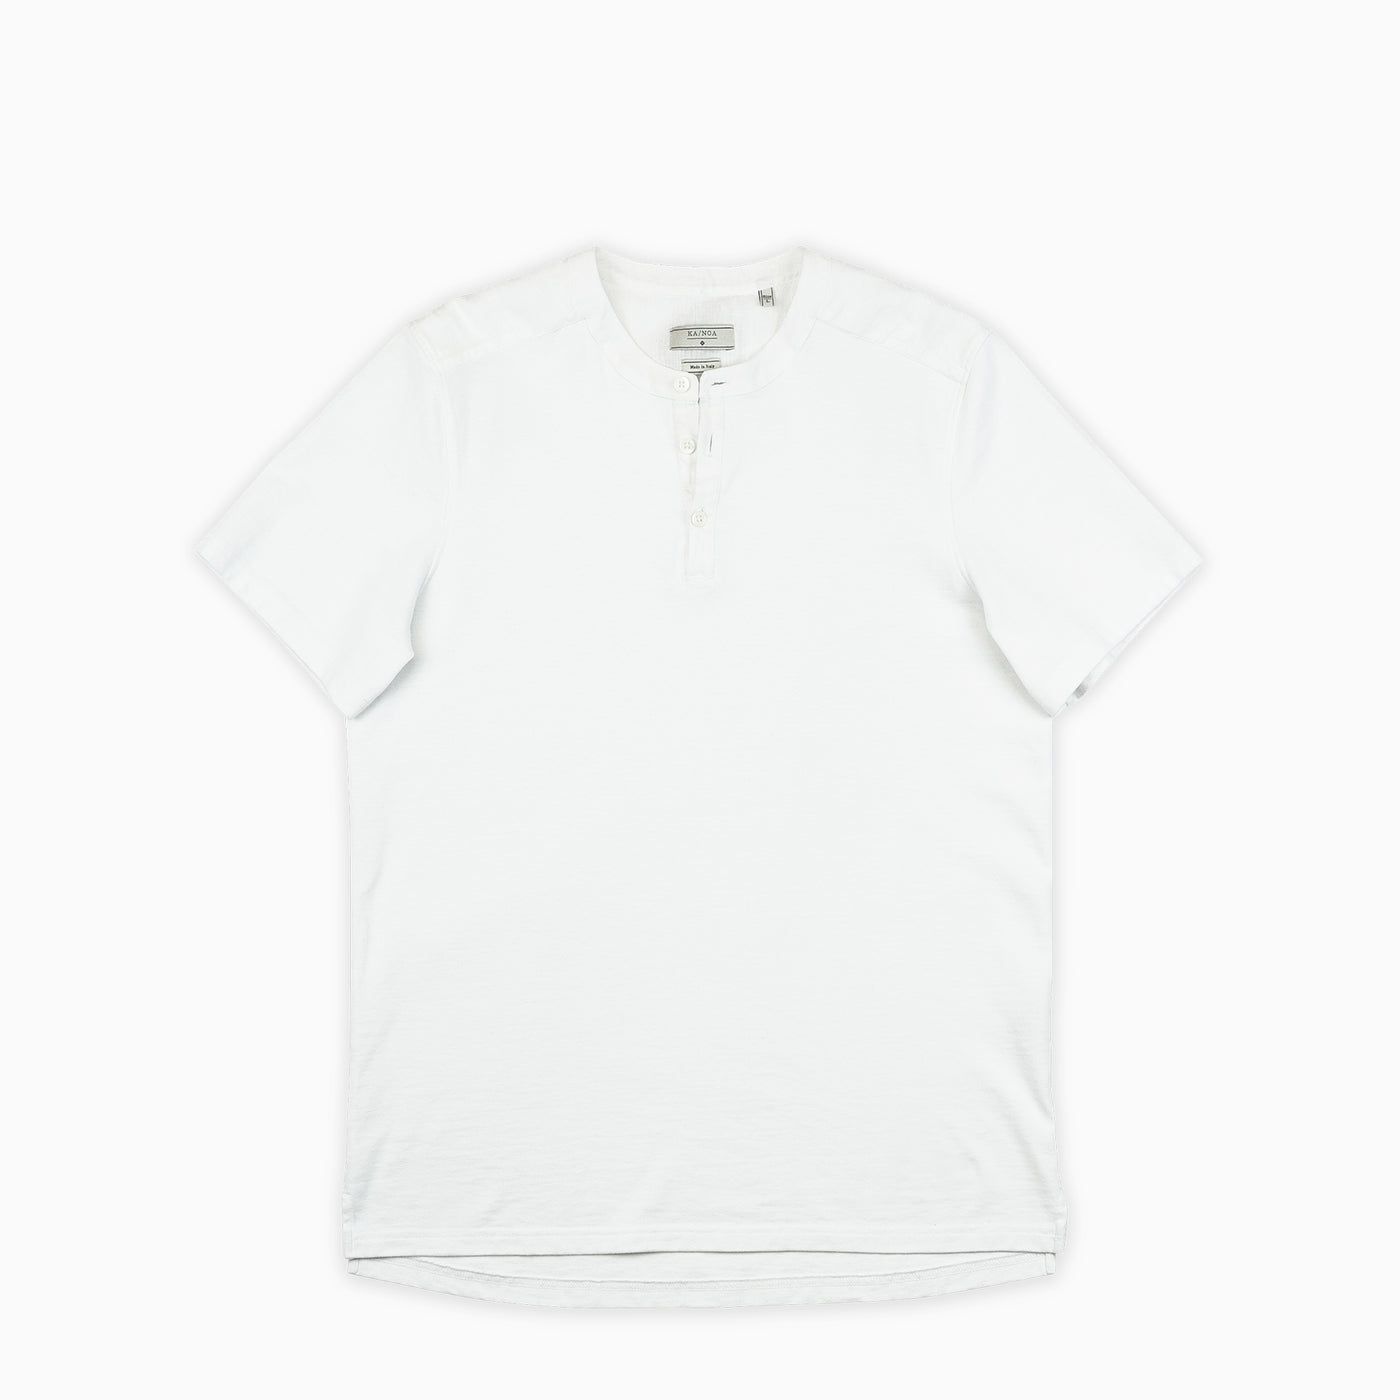 Marc t-shirt in heavy cotton jersey (natural white)